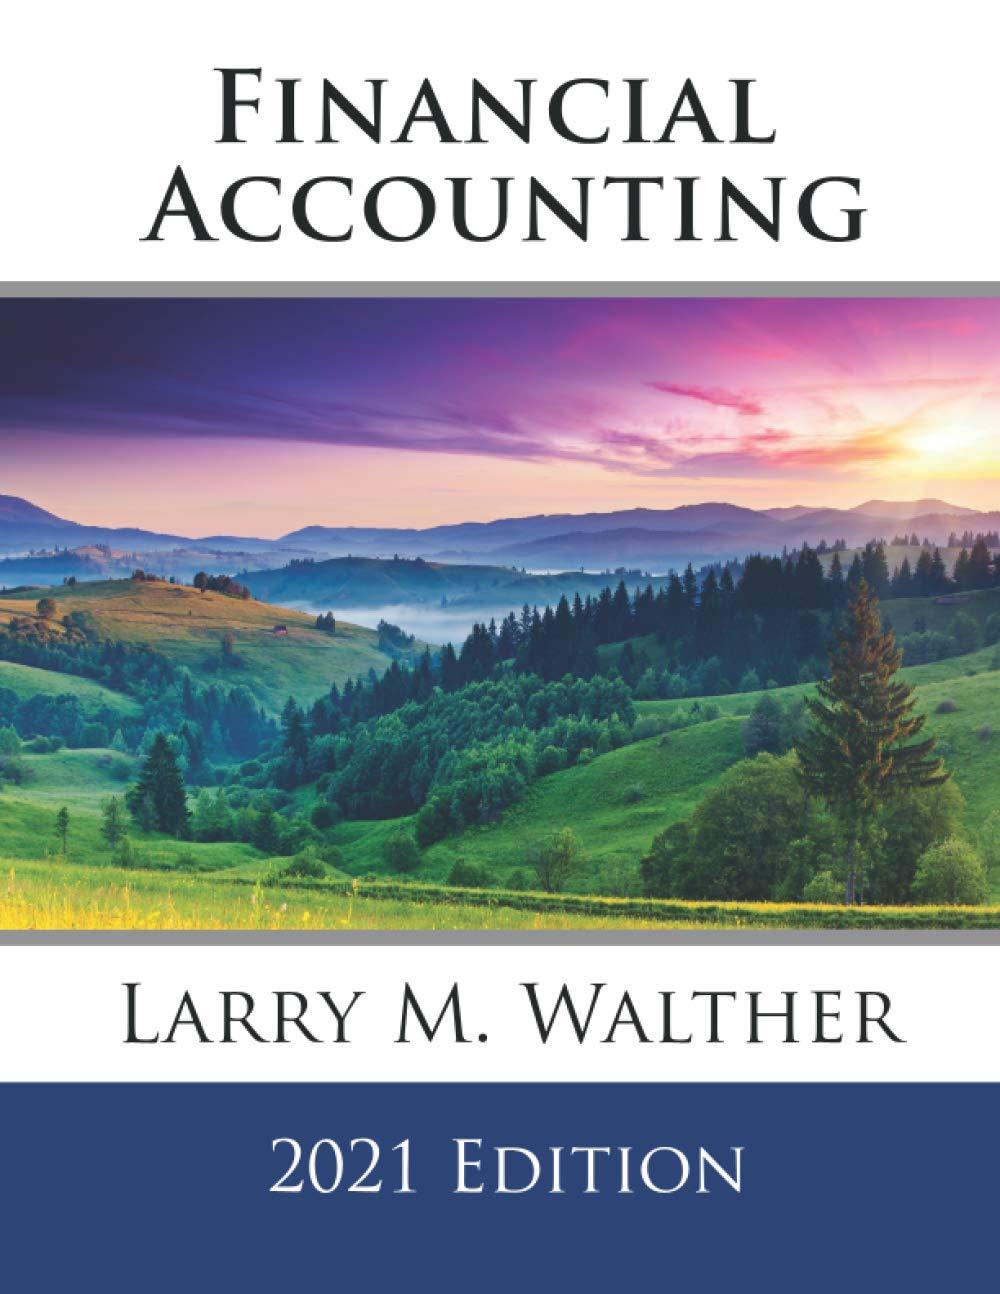 financial accounting 2021th edition larry m. walther 8550519721, 979-8550519721